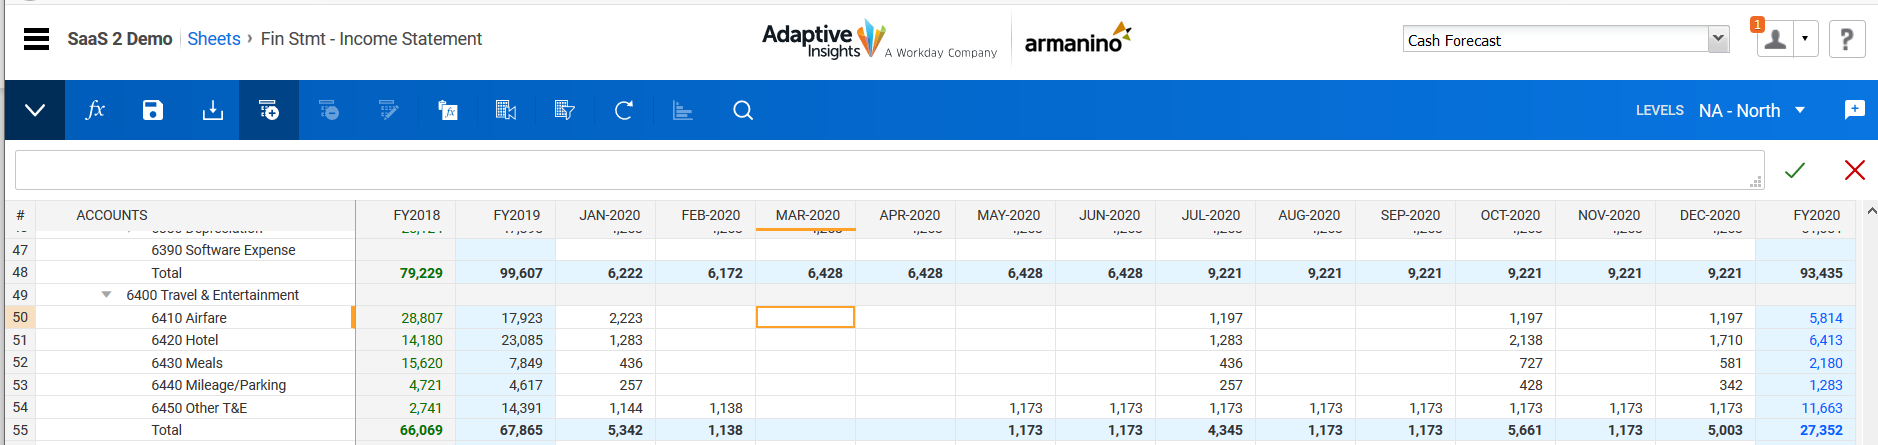 Reforecasting for Sudden Changes Using Workday Adaptive Planning - Update Input Sheets